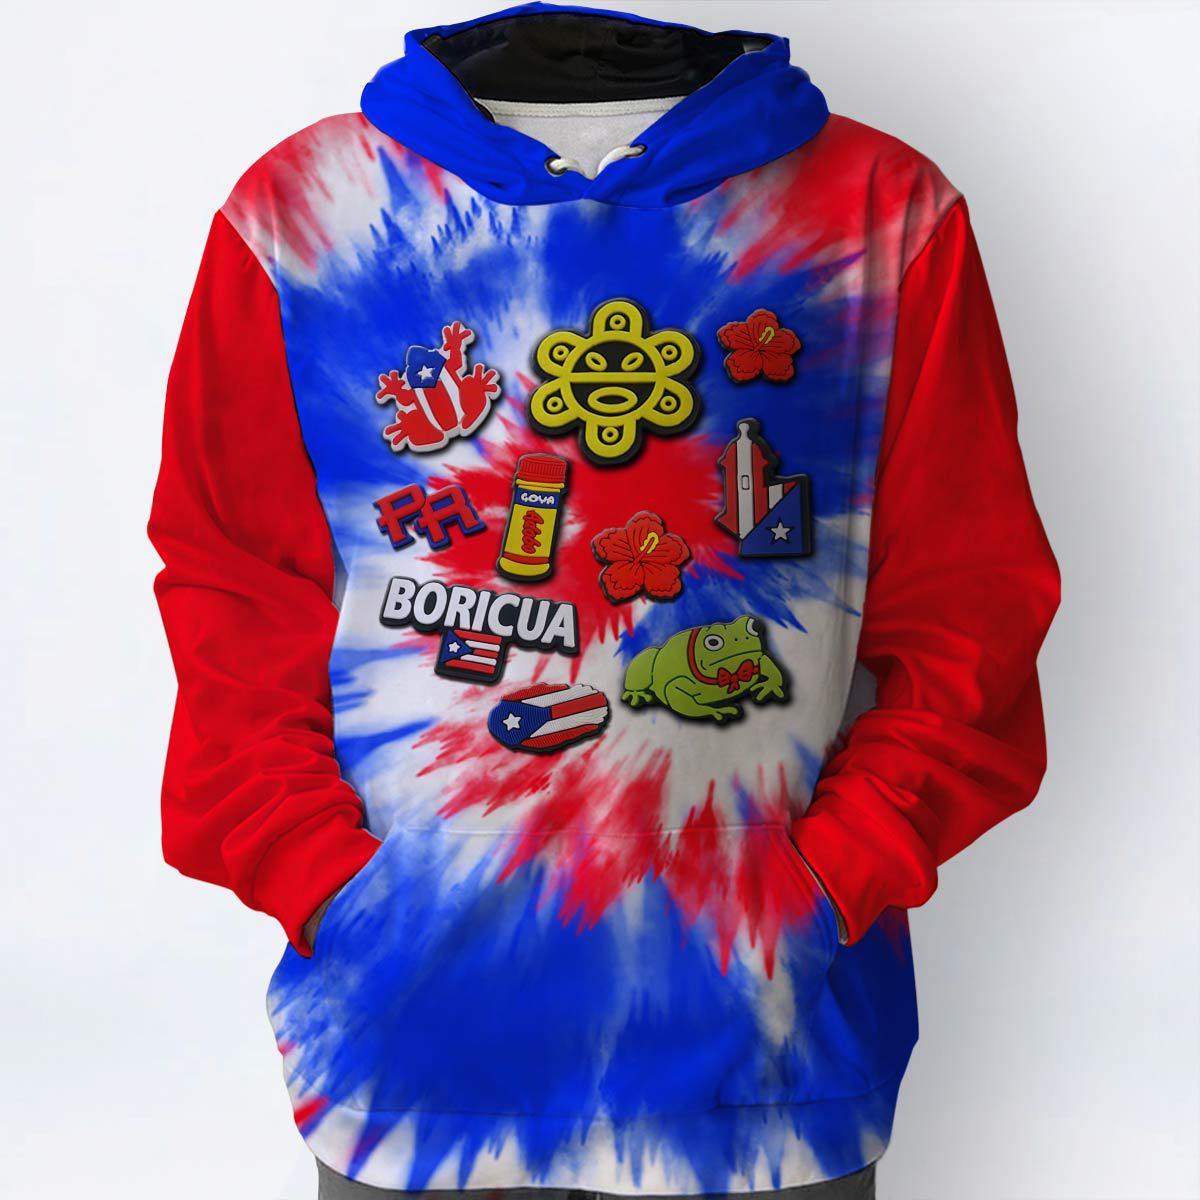 Puerto Rico Flag Personalized Hoodie With Symbols Tie Dye